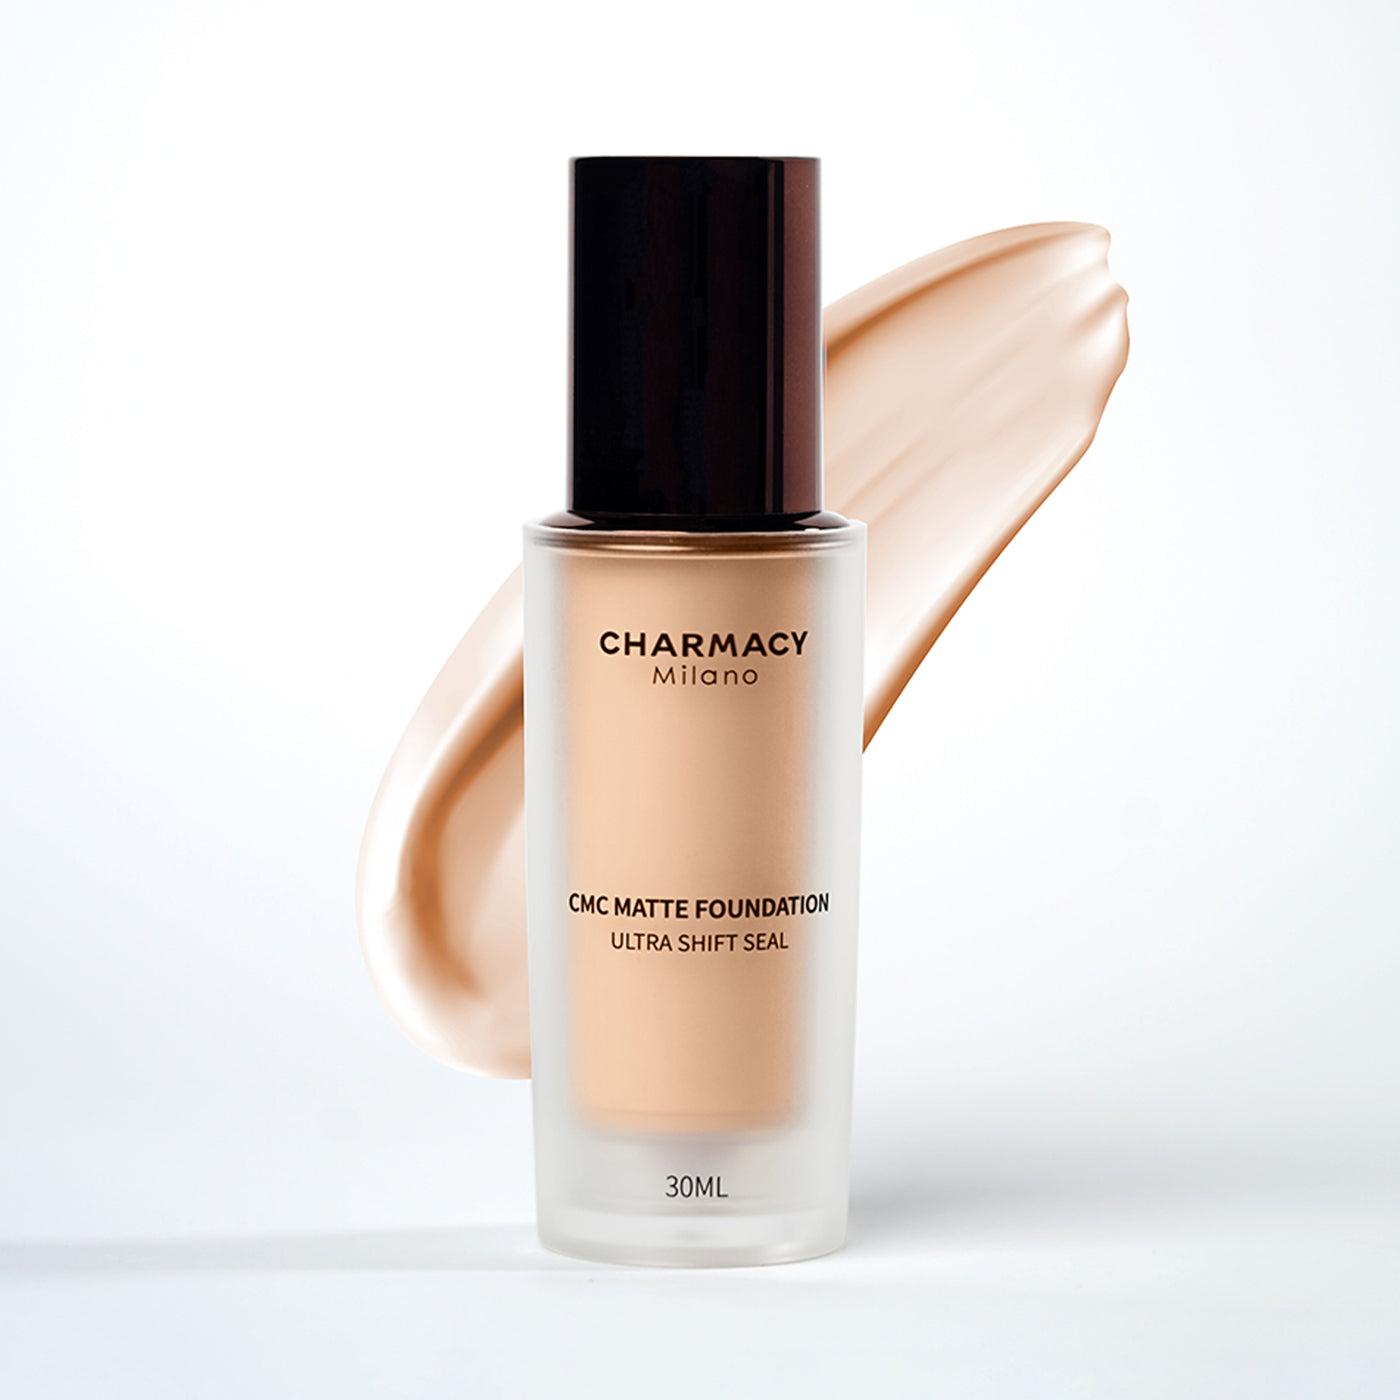 Charmacy Milano| Matte All-day Foundation